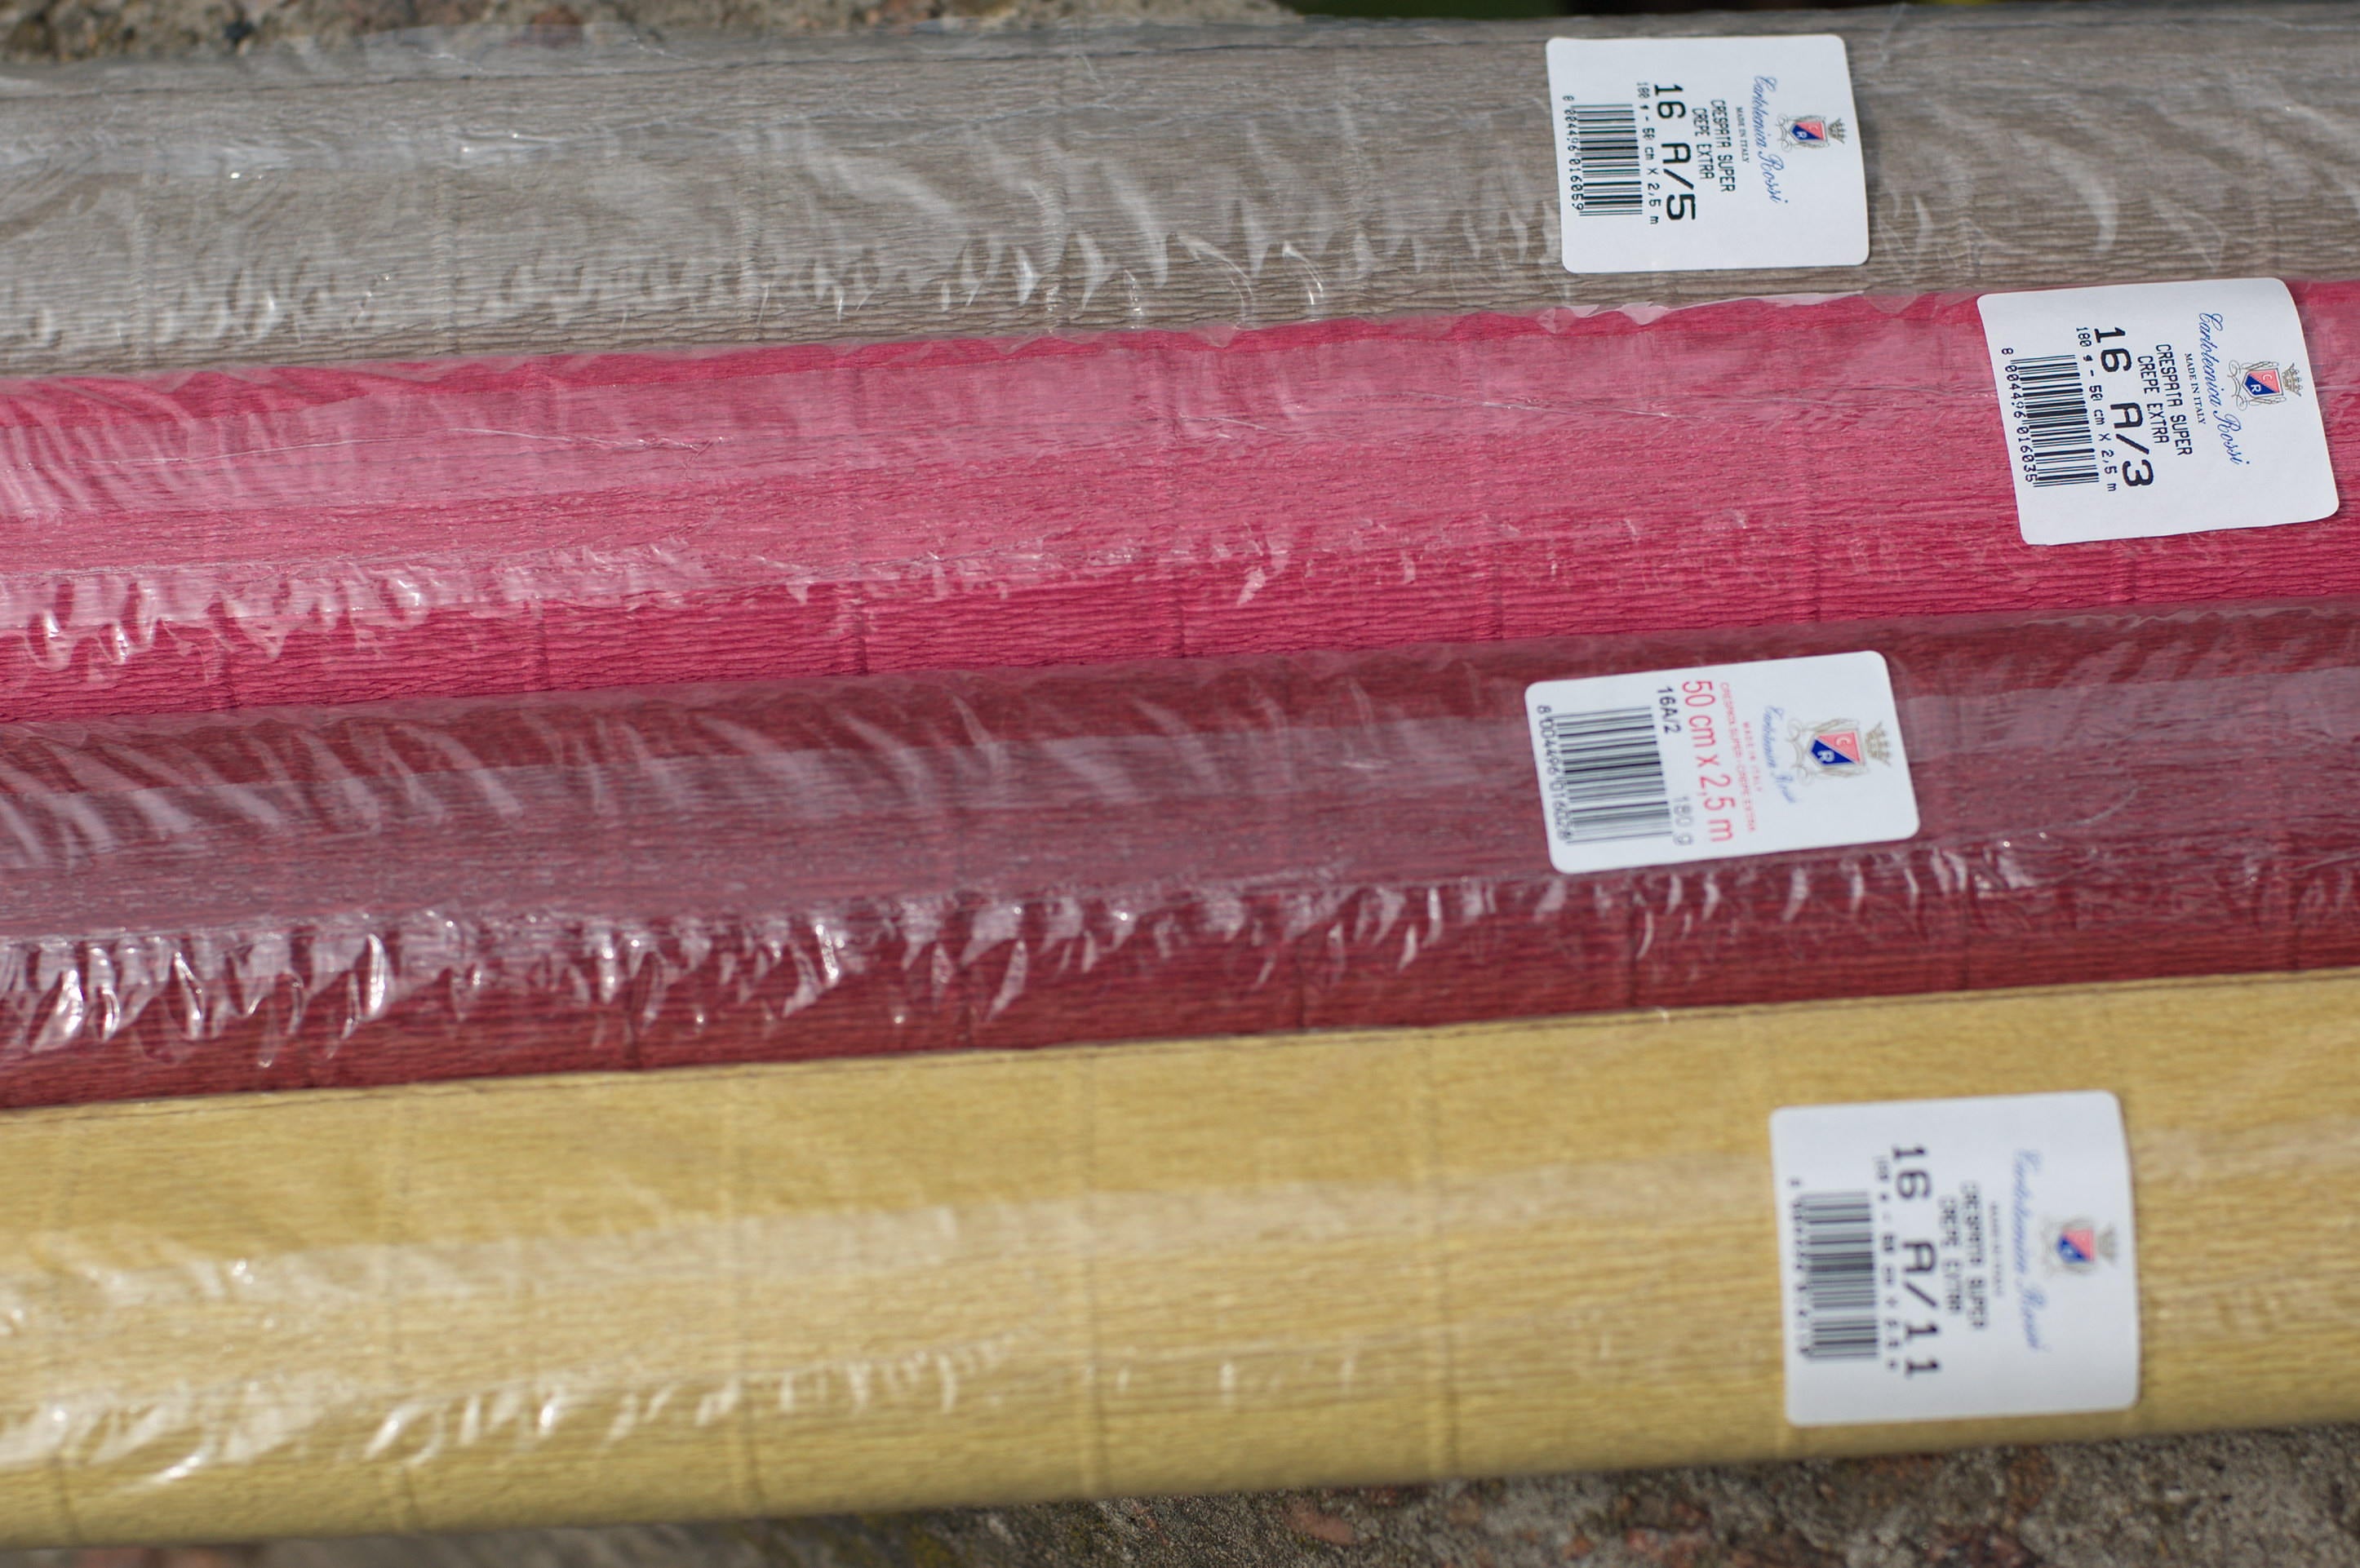 Italian Crepe Paper Rolls, Paper Flowers, Wrapping Paper, Decor